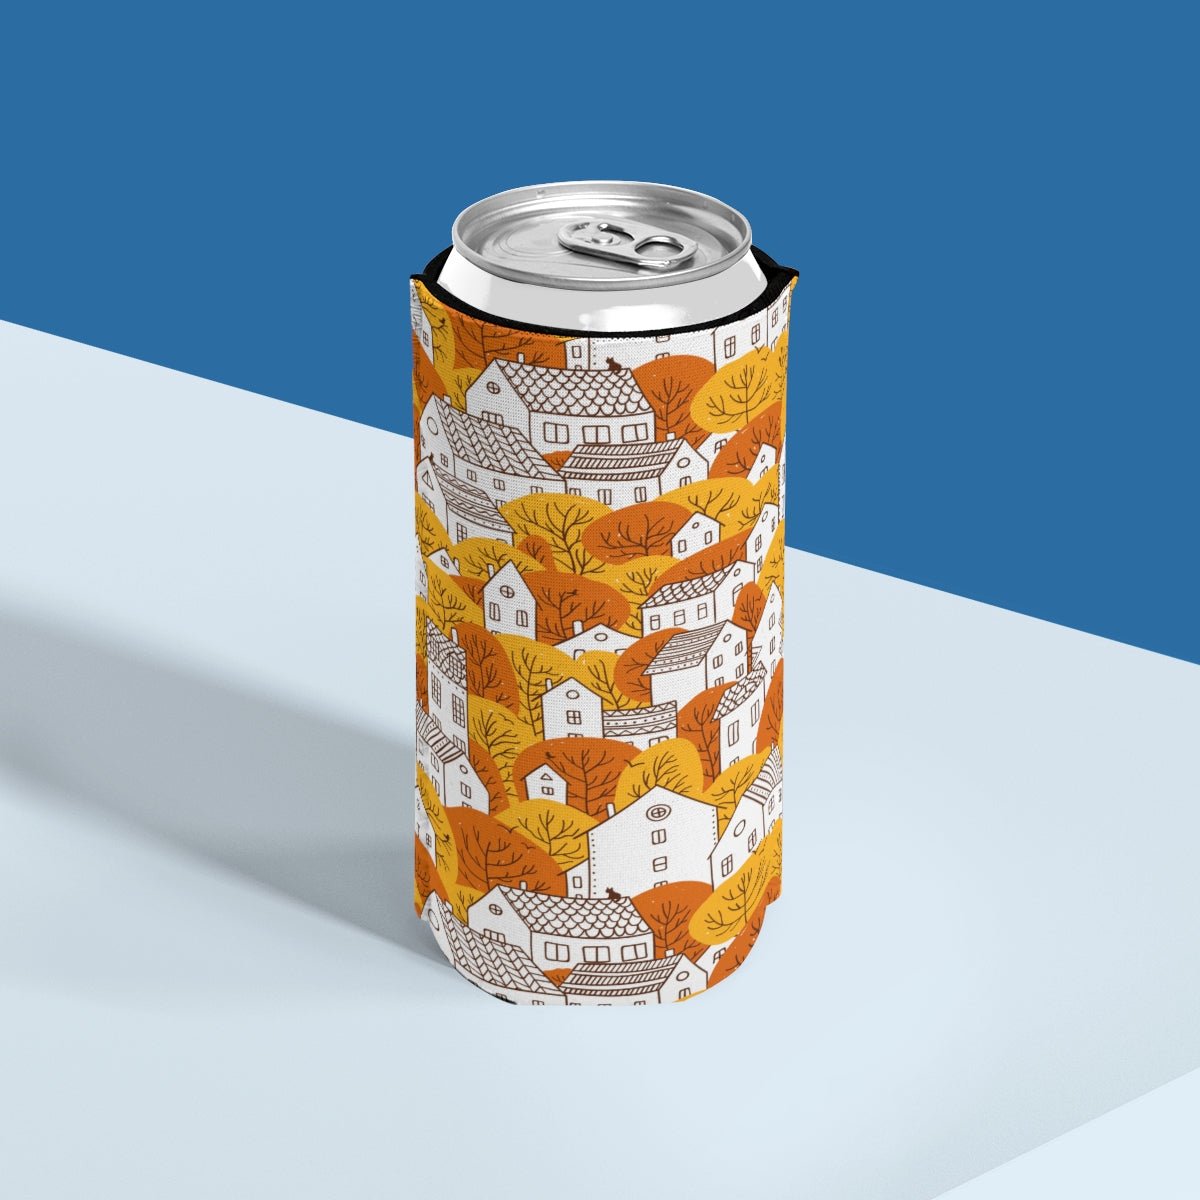 Fall Nordic Houses Slim Can Cooler - Puffin Lime